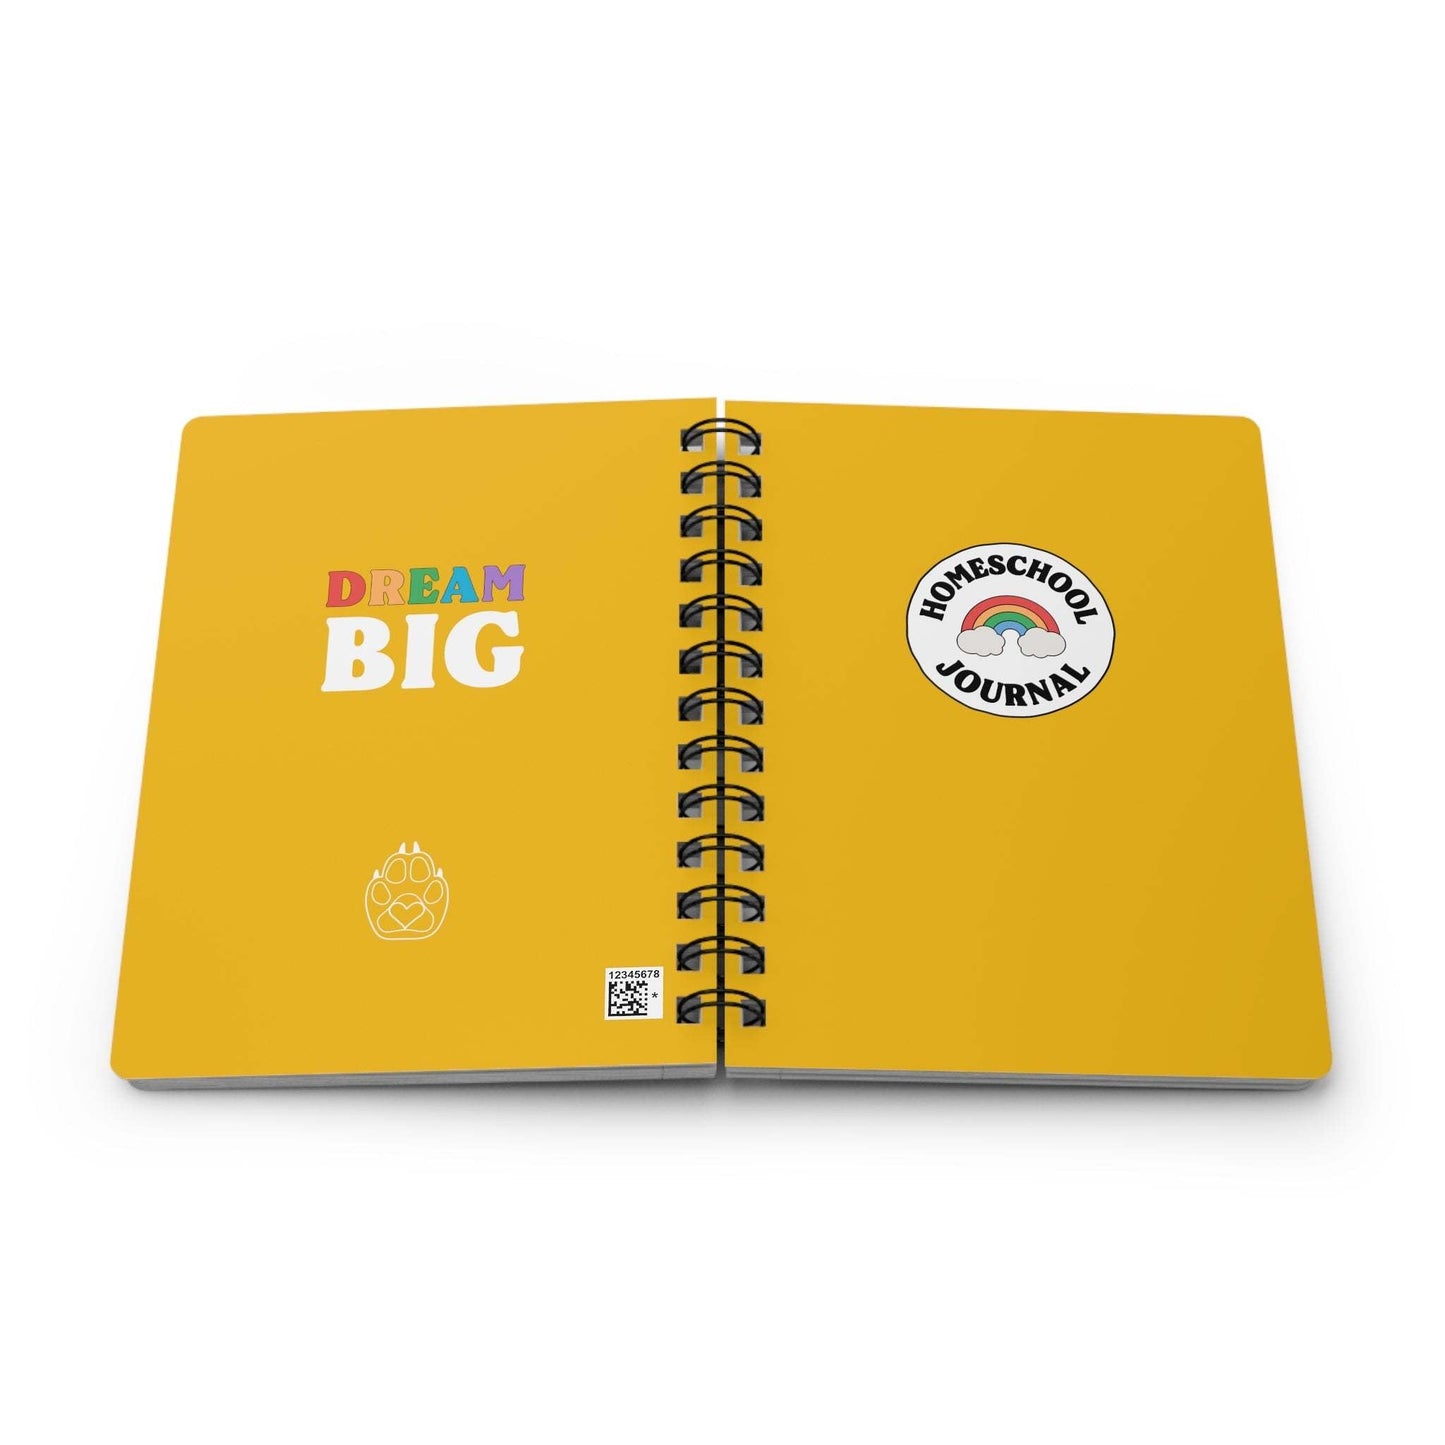 Rainbow Homeschool Spiral Bound JournalWolfe Paw DesignsRainbow Homeschool Spiral Bound JournalYellow - Rainbow homeschool lined journal
Your homeschooler can now write in style with our themed lined journals made for kids just like yours!
Each color has its oRainbow Homeschool Spiral Bound Journal